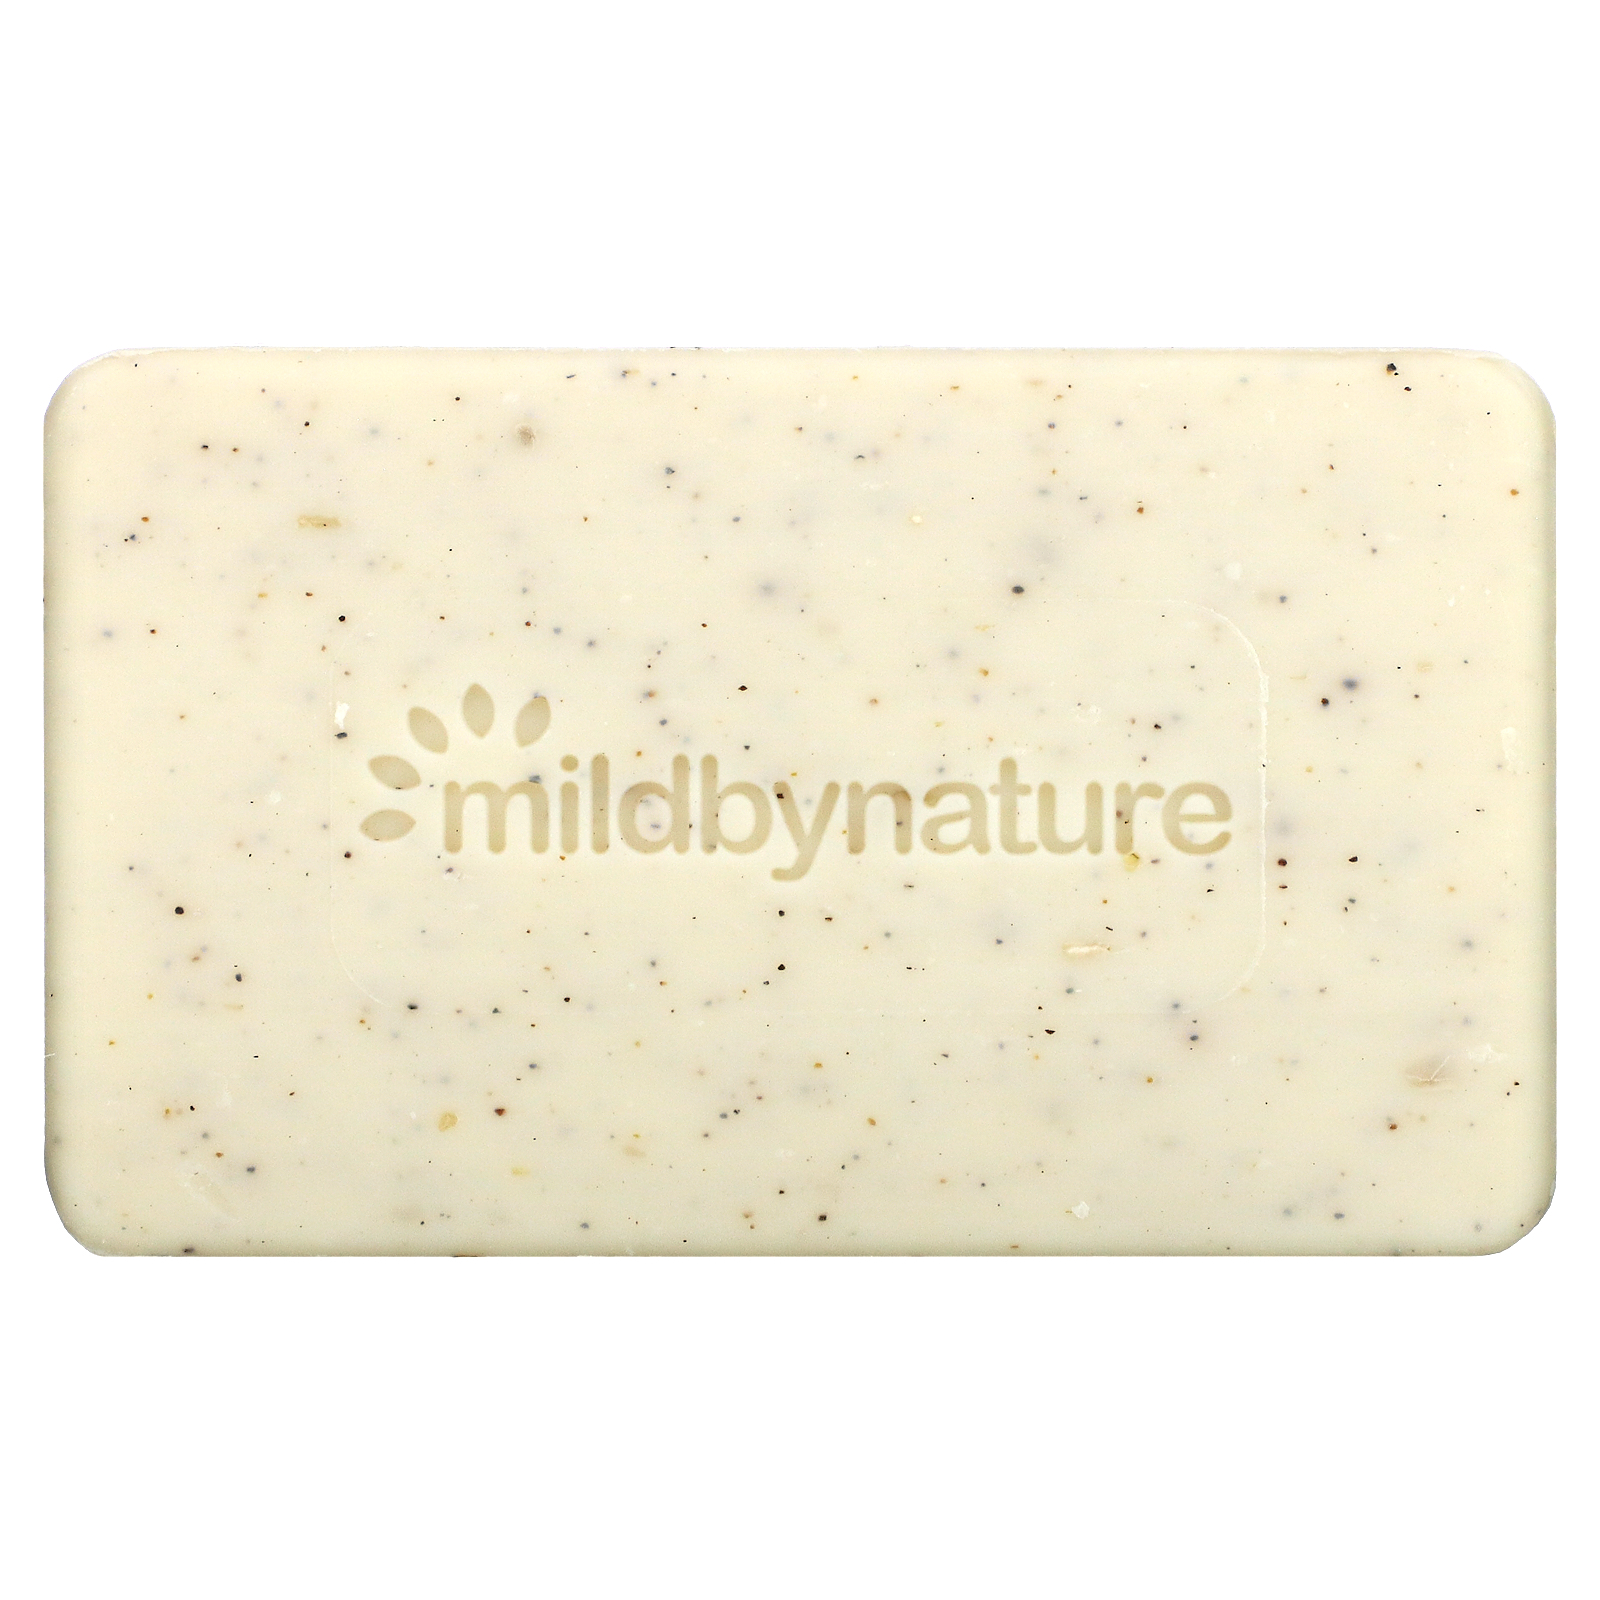 Mild By Nature Exfoliating Bar Soap With Marula And Tamanu Oils Plus